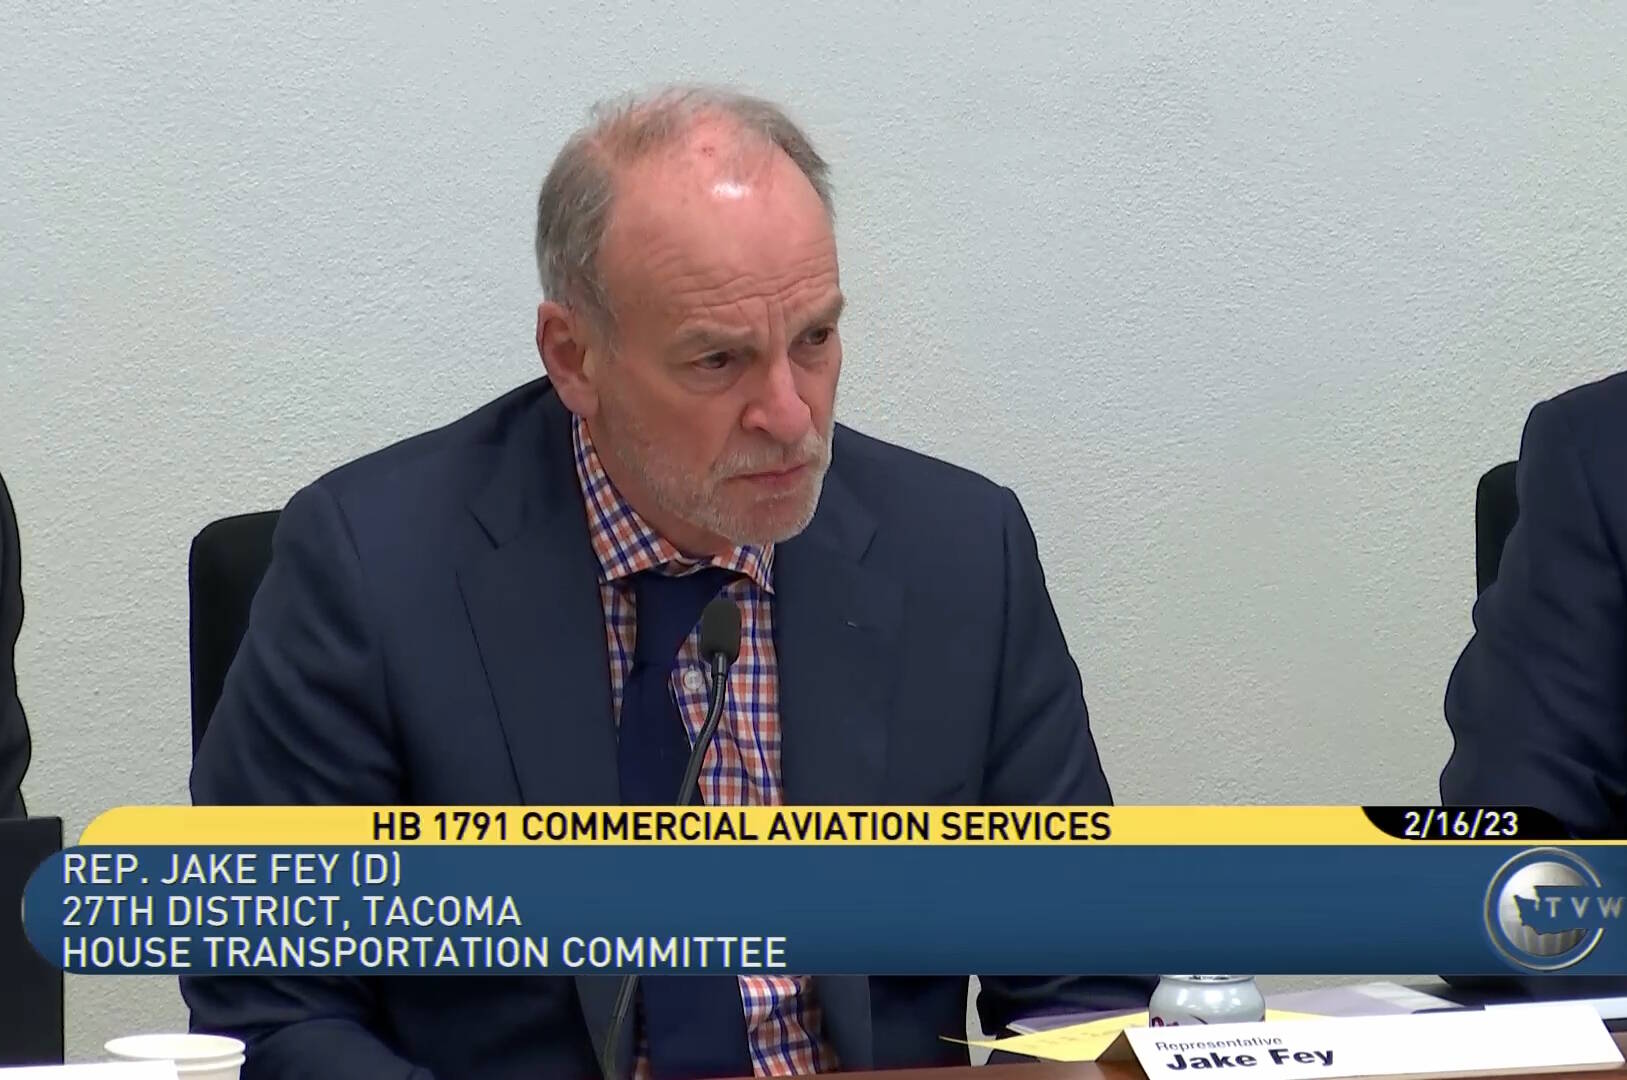 Tacoma Rep. Jake Fey (D) speaks to the future of Washington state’s commercial aviation needs during a Feb. 16 House of Representatives transportation committee hearing. Photo via TVW.